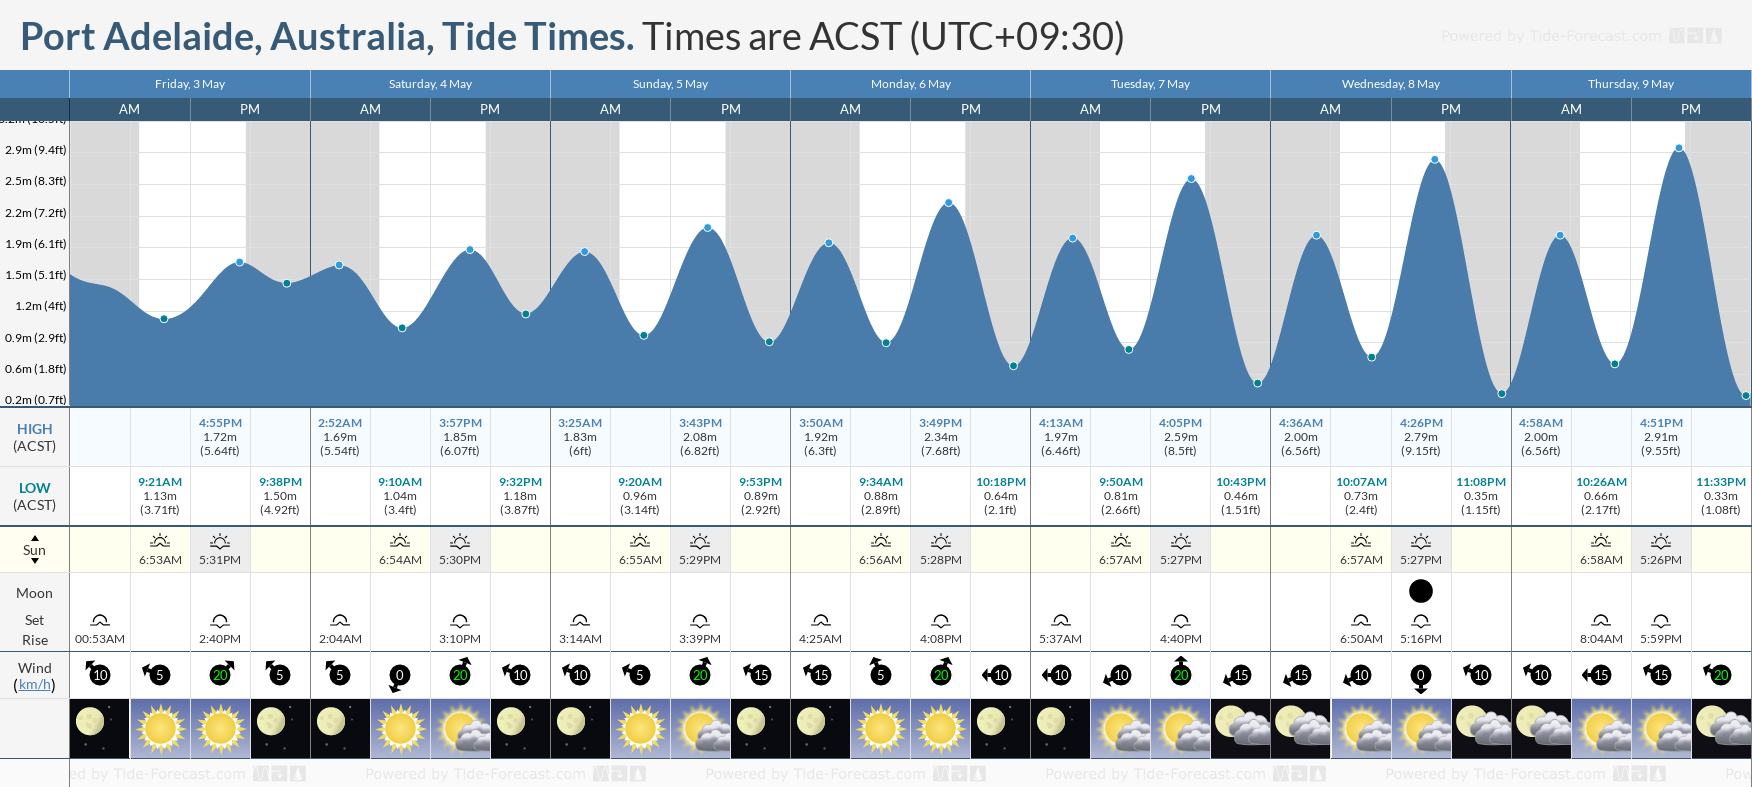 Port Adelaide, Australia Tide Chart including high and low tide times for the next 7 days